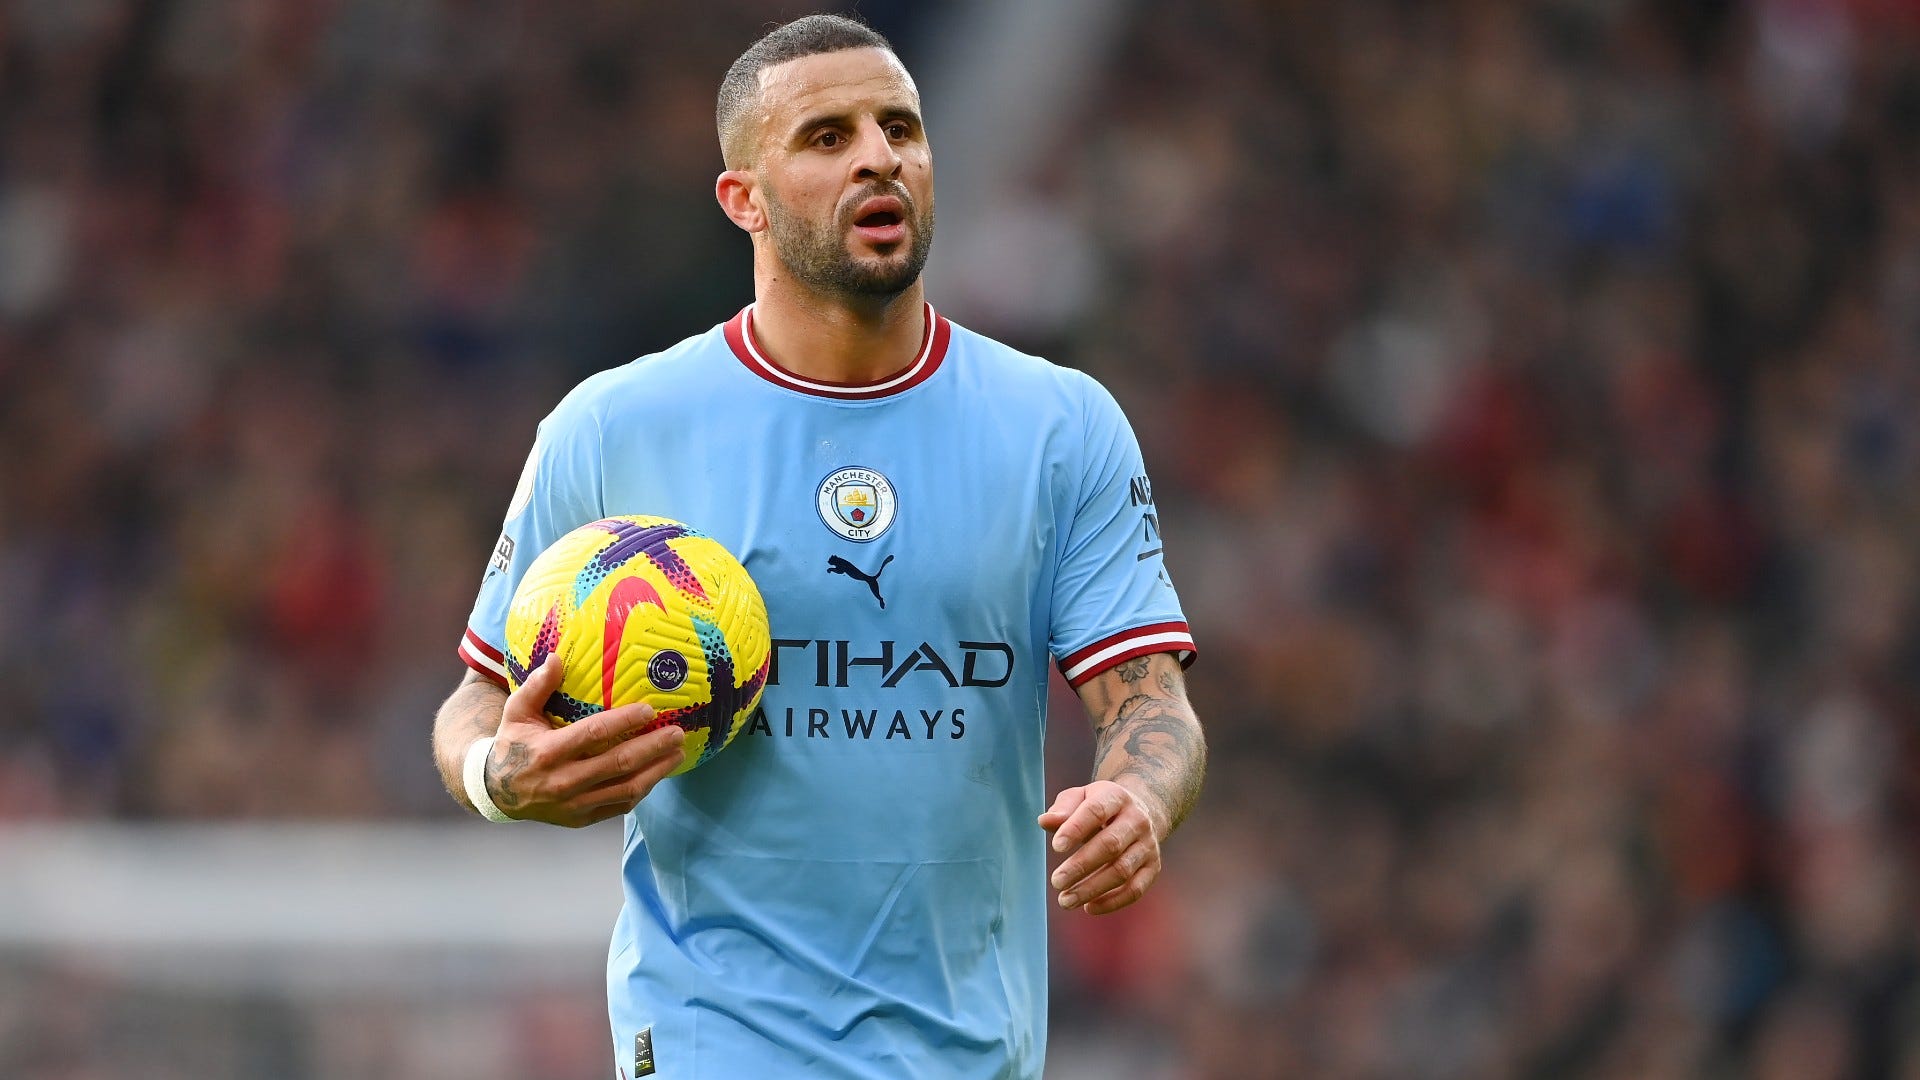  Kyle Walker of Manchester City in action during the match against Real Madrid.